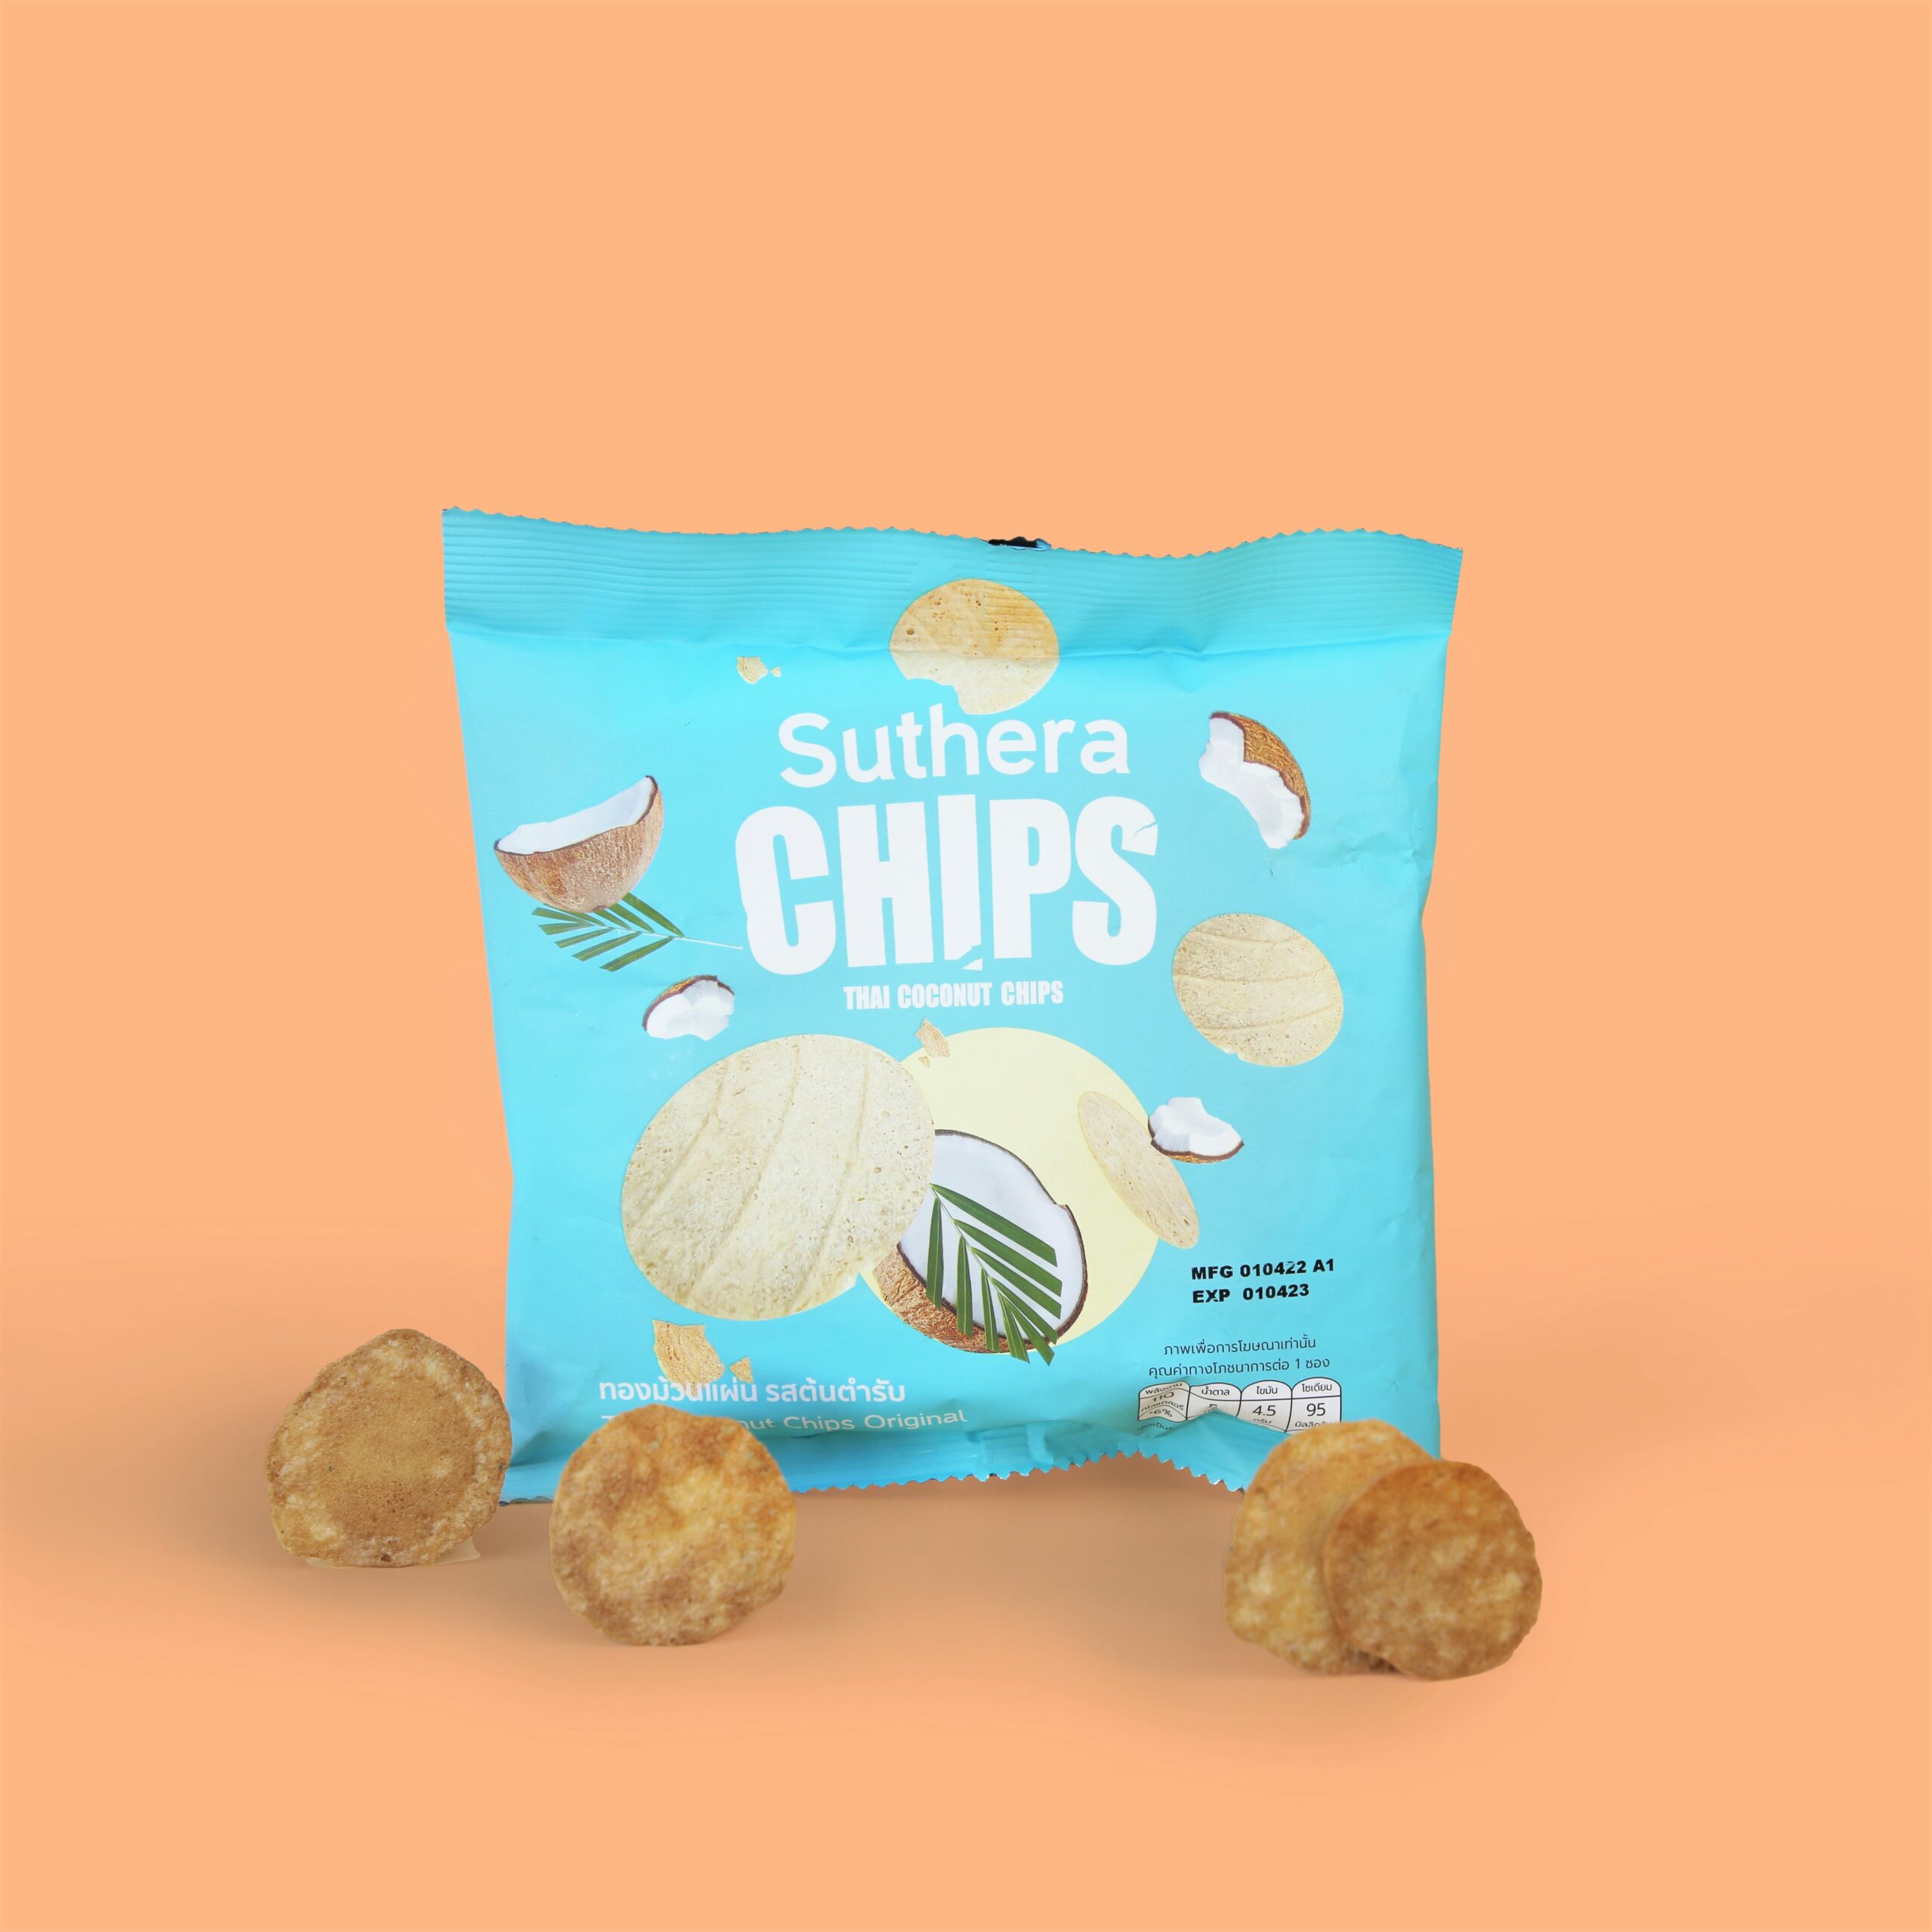 Suthera coconut chips Thai traditional snack